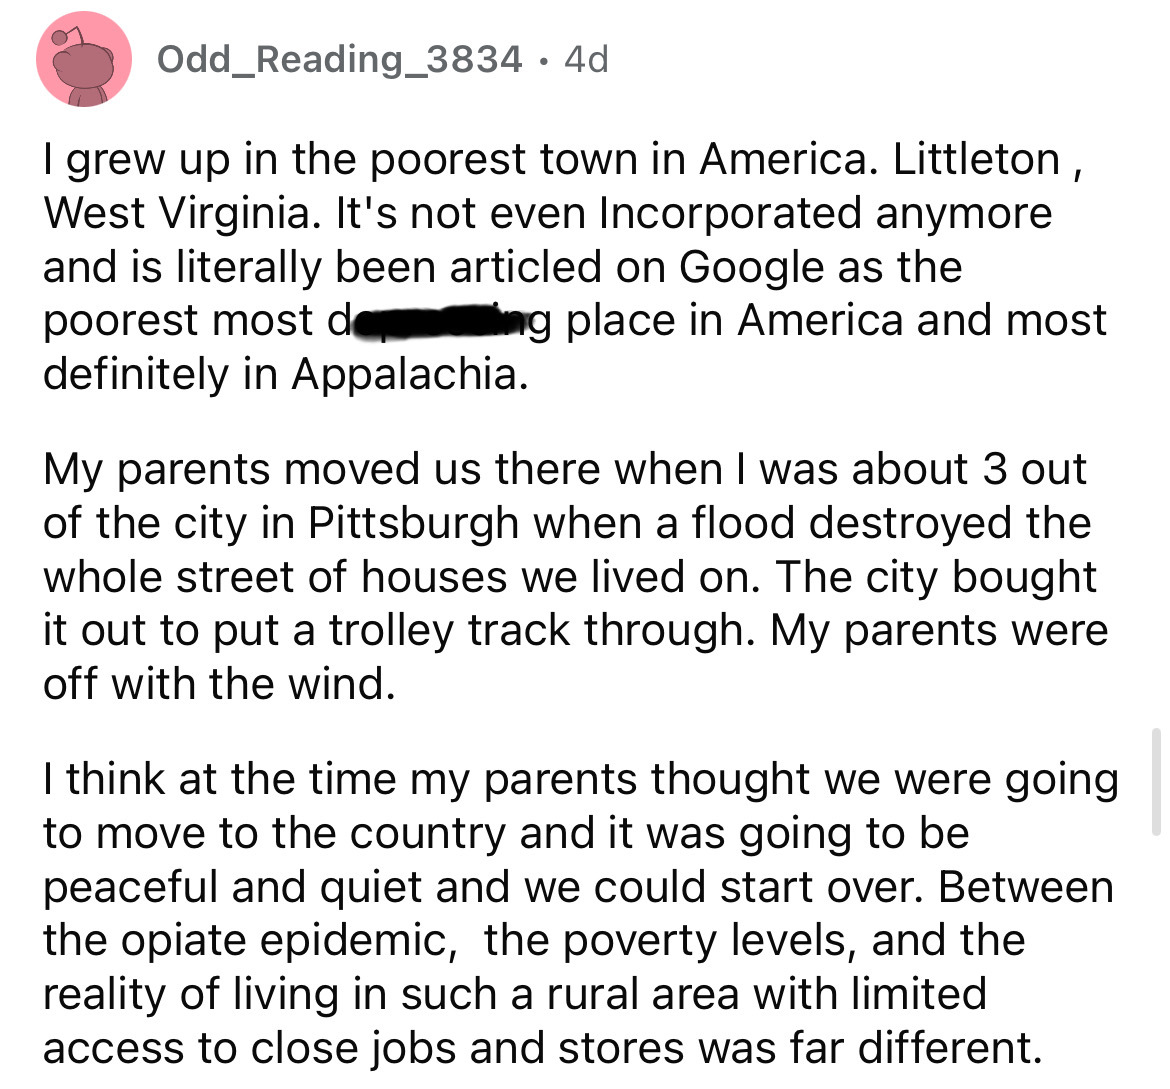 document - Odd_Reading_3834 4d I grew up in the poorest town in America. Littleton, West Virginia. It's not even Incorporated anymore and is literally been articled on Google as the poorest most de ing place in America and most definitely in Appalachia. M